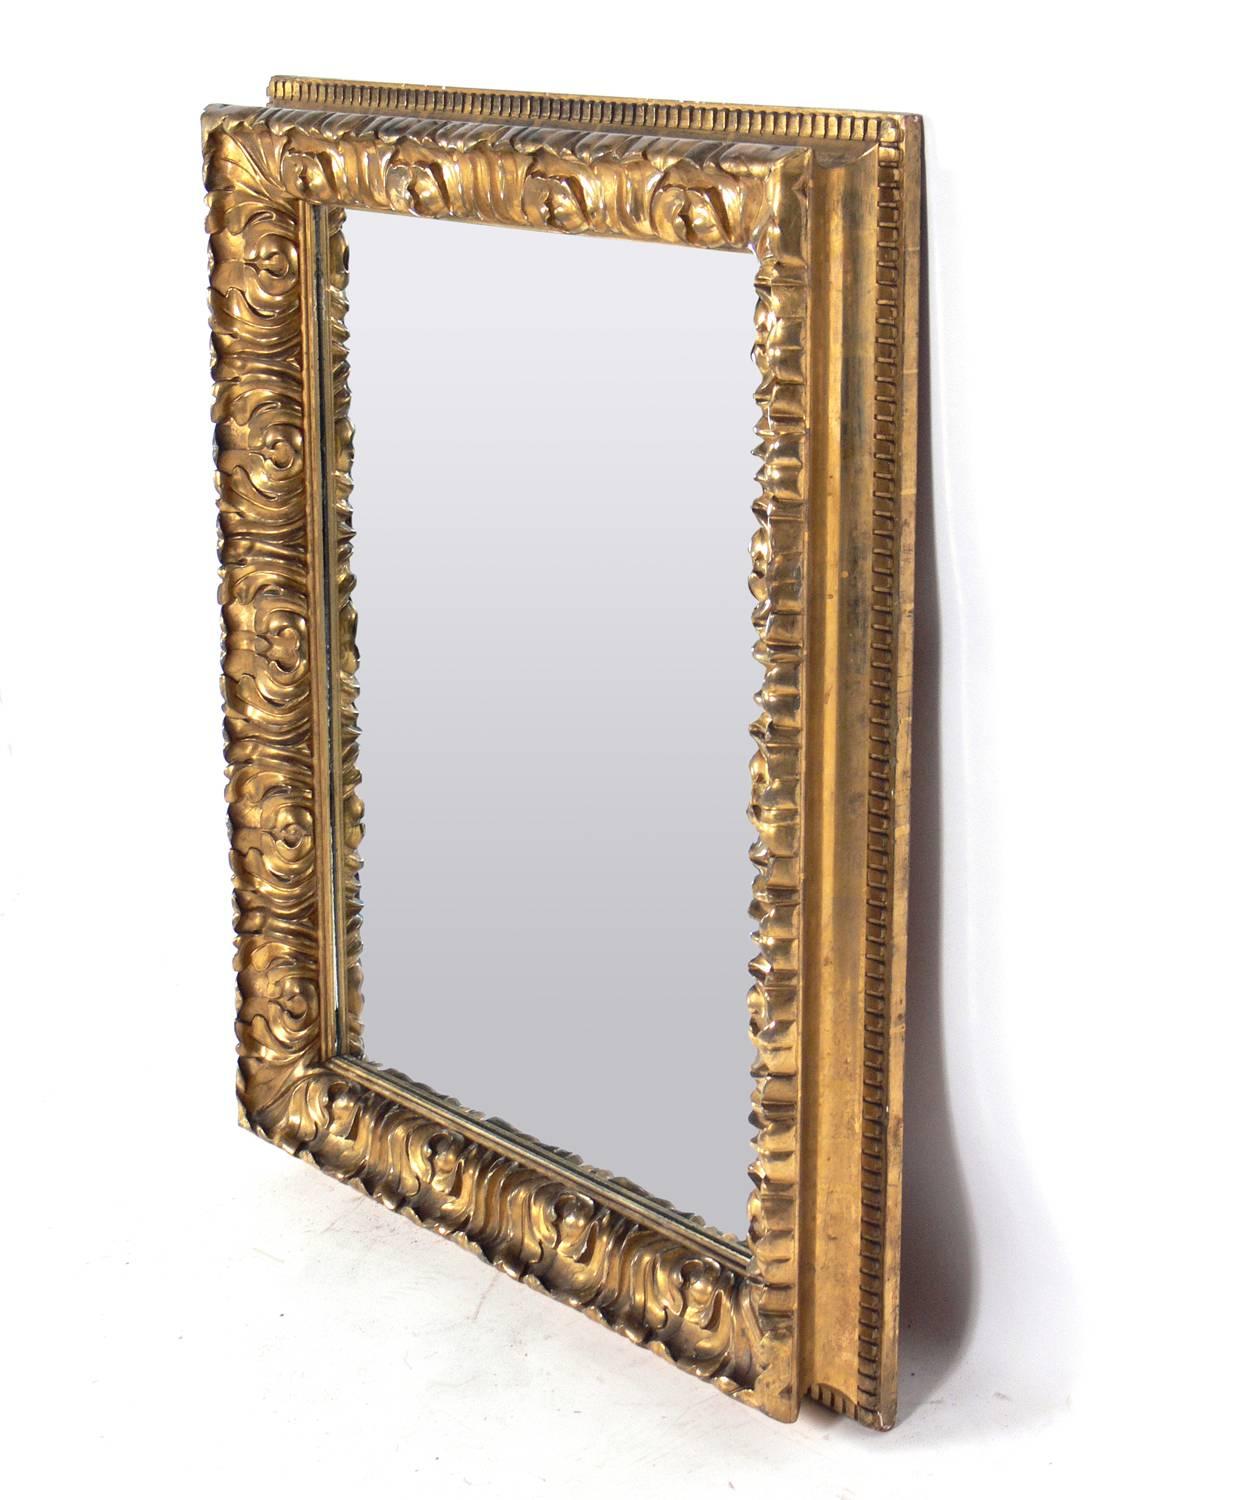 Perfectly Patinated 19th Century Deep Cove Gilt Mirror, probably American, circa 1800s. Retains wonderful original patina to the gilt frame. Mirror probably replaced at some point. 